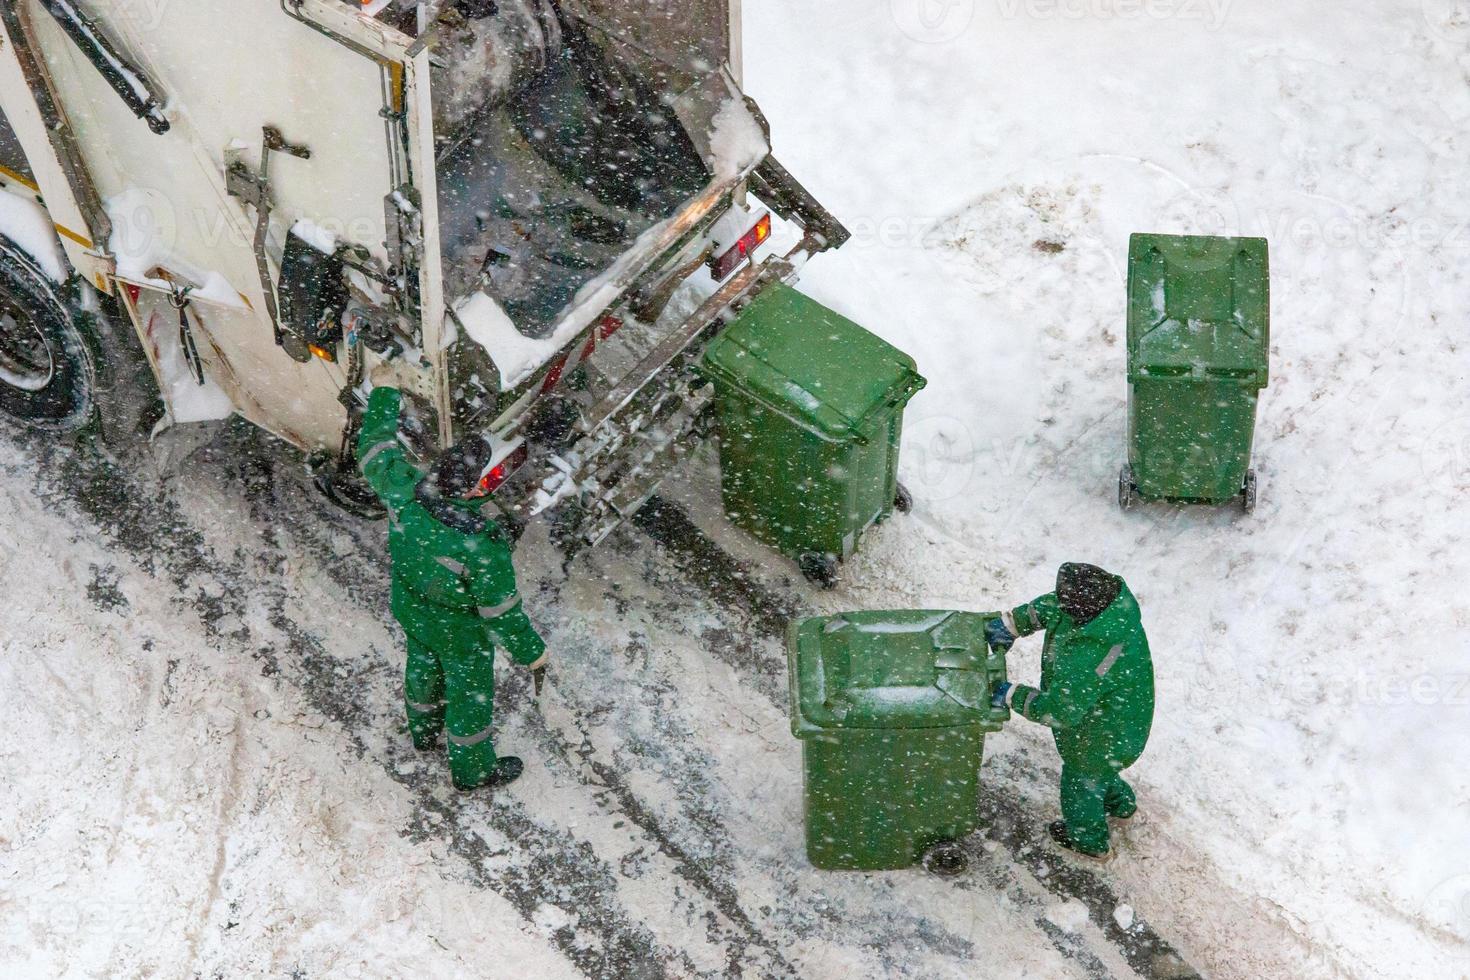 Garbage collection in winter snowy weather photo